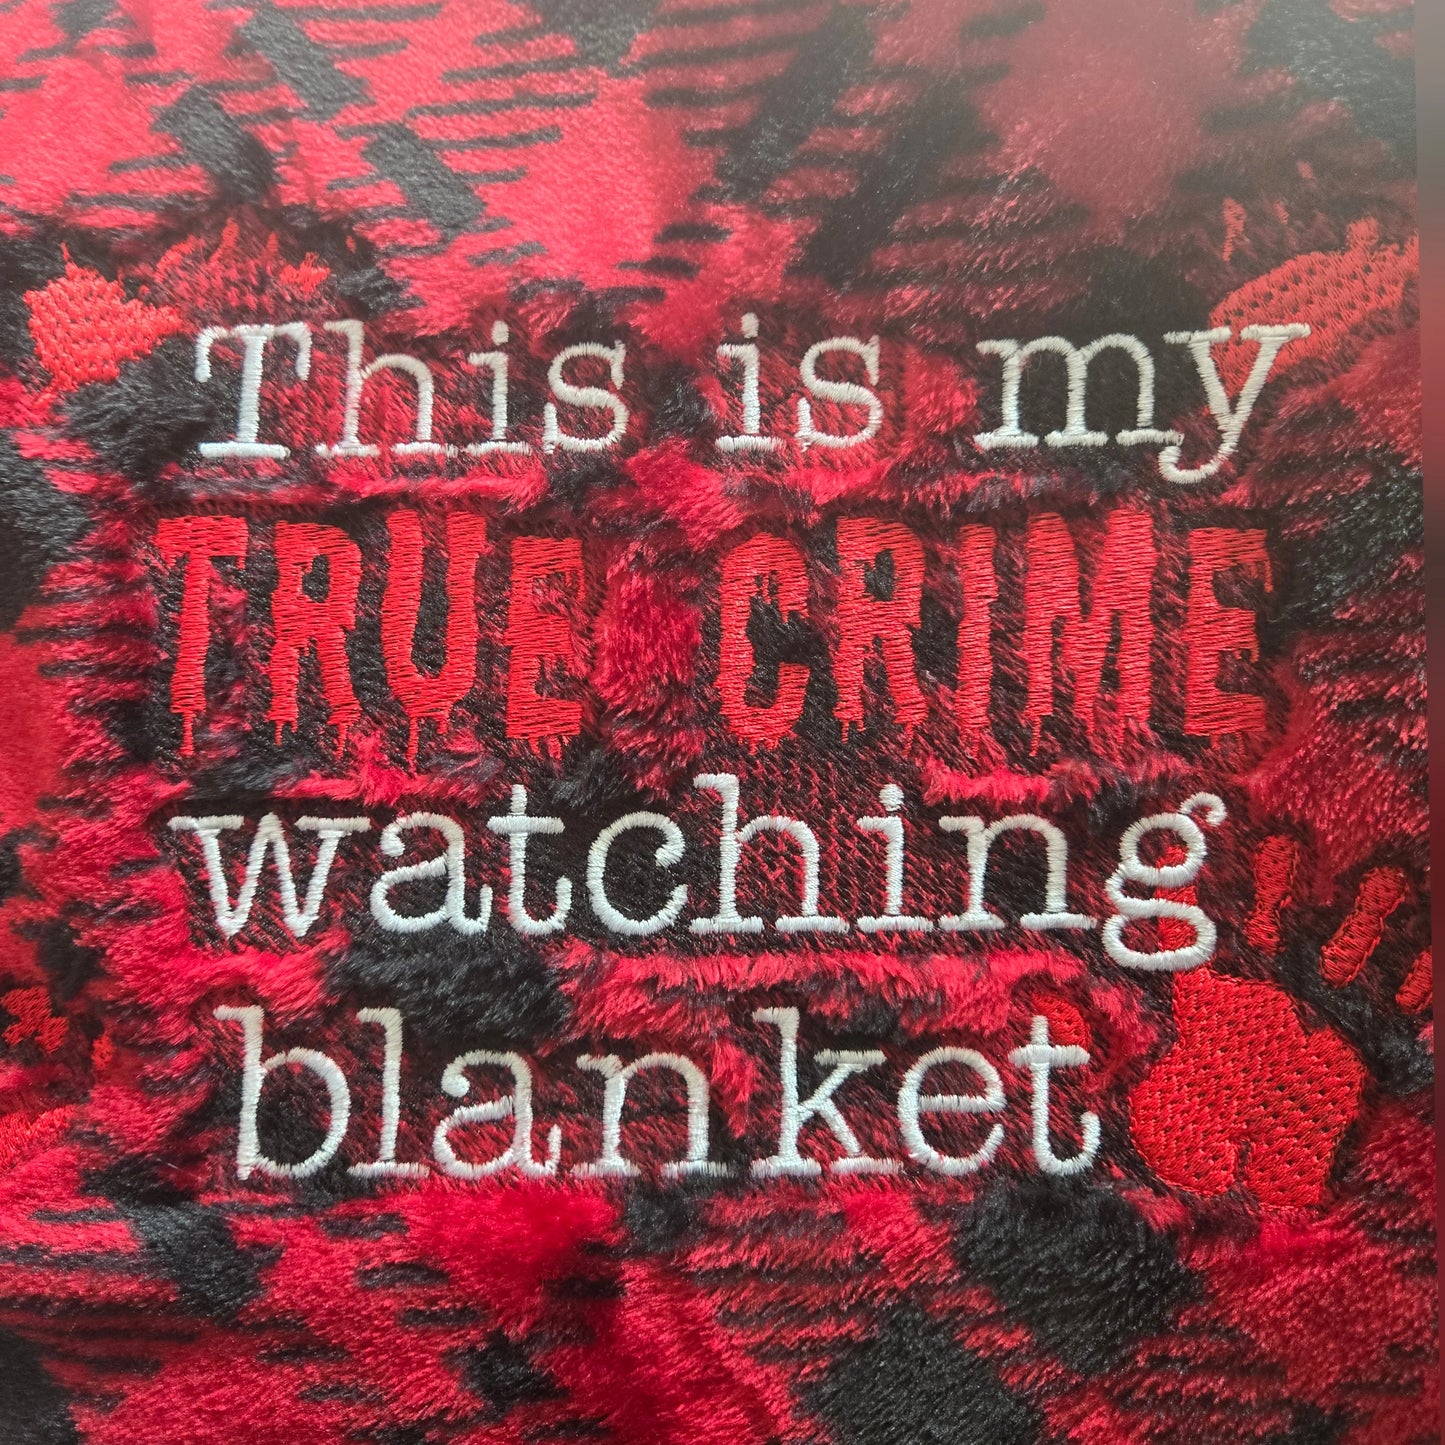 "This Is My TRUE CRIME Watching Blanket" Plush The Big One Oversized Throw Blanket